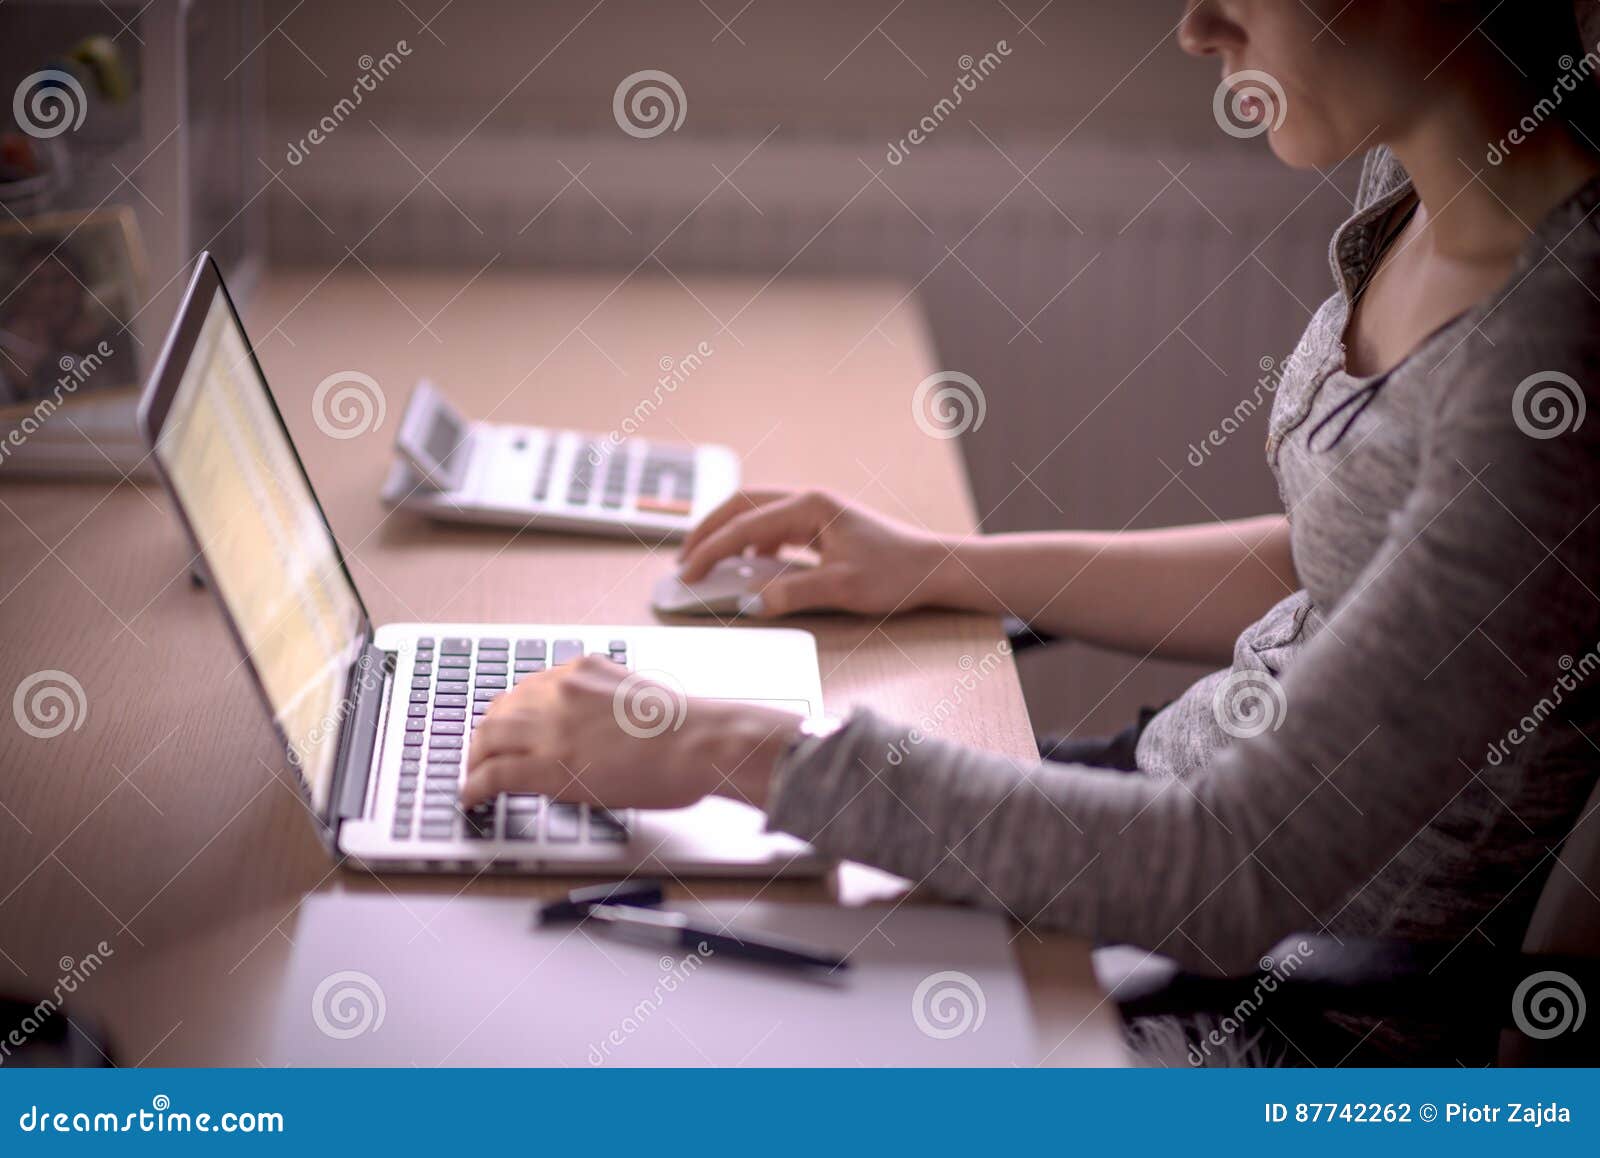 Freelance Work at Home stock photo. Image of occupation - 87742262